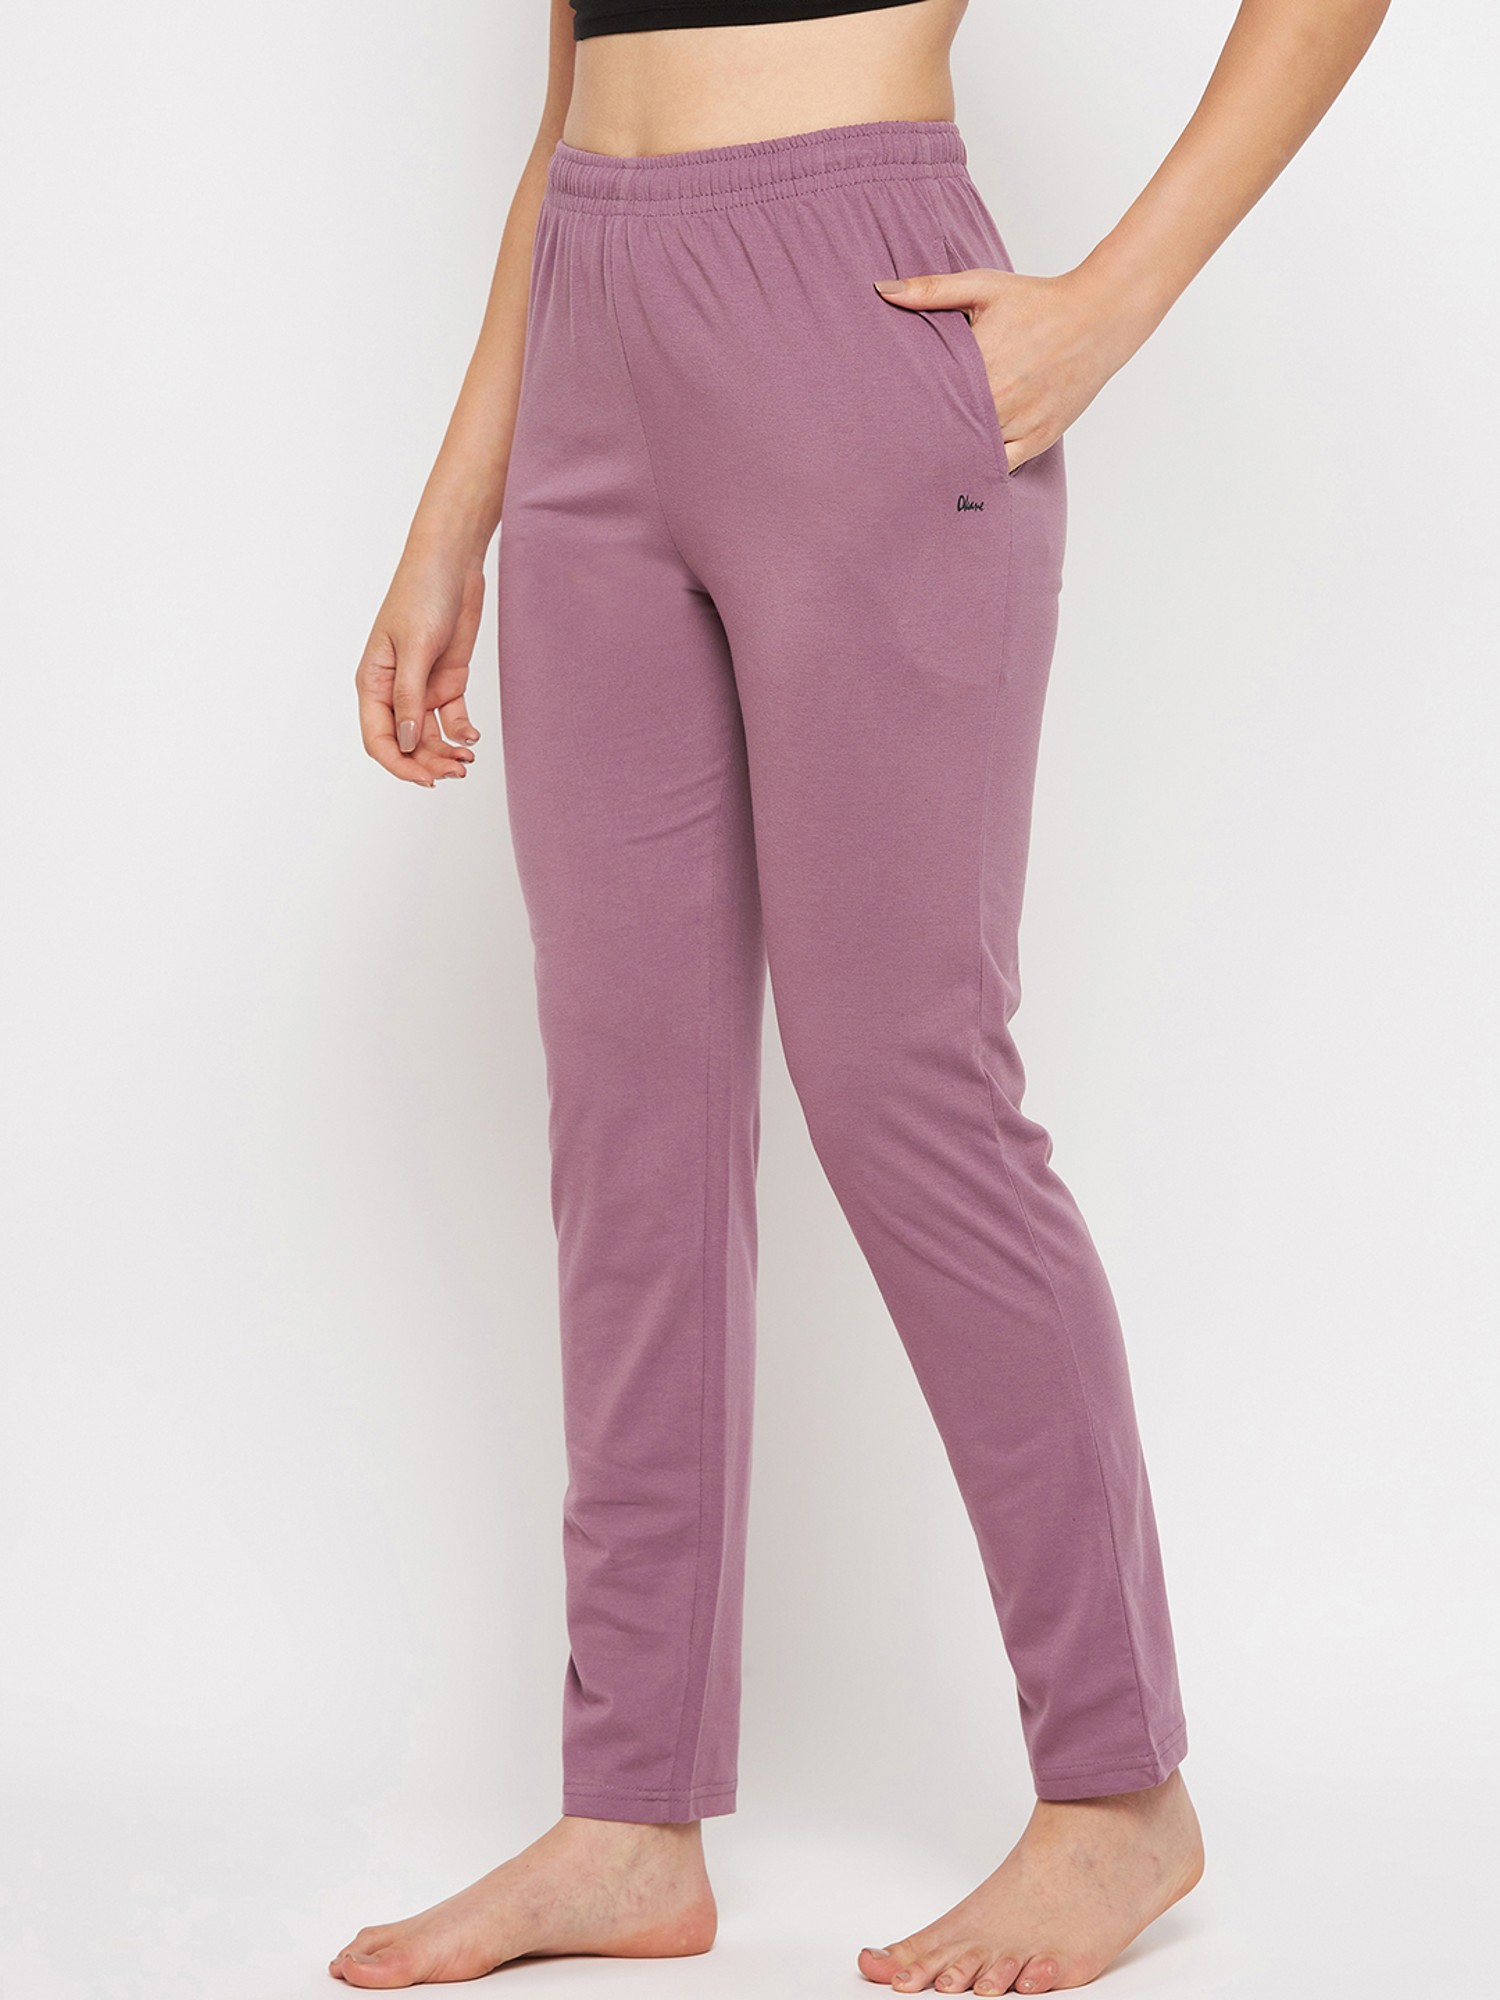 Women's Mid-Rise Cotton Casual Work Pants Daily Solid Color Comfortable-Fit  Stretch Twill Chino Pants - Walmart.com